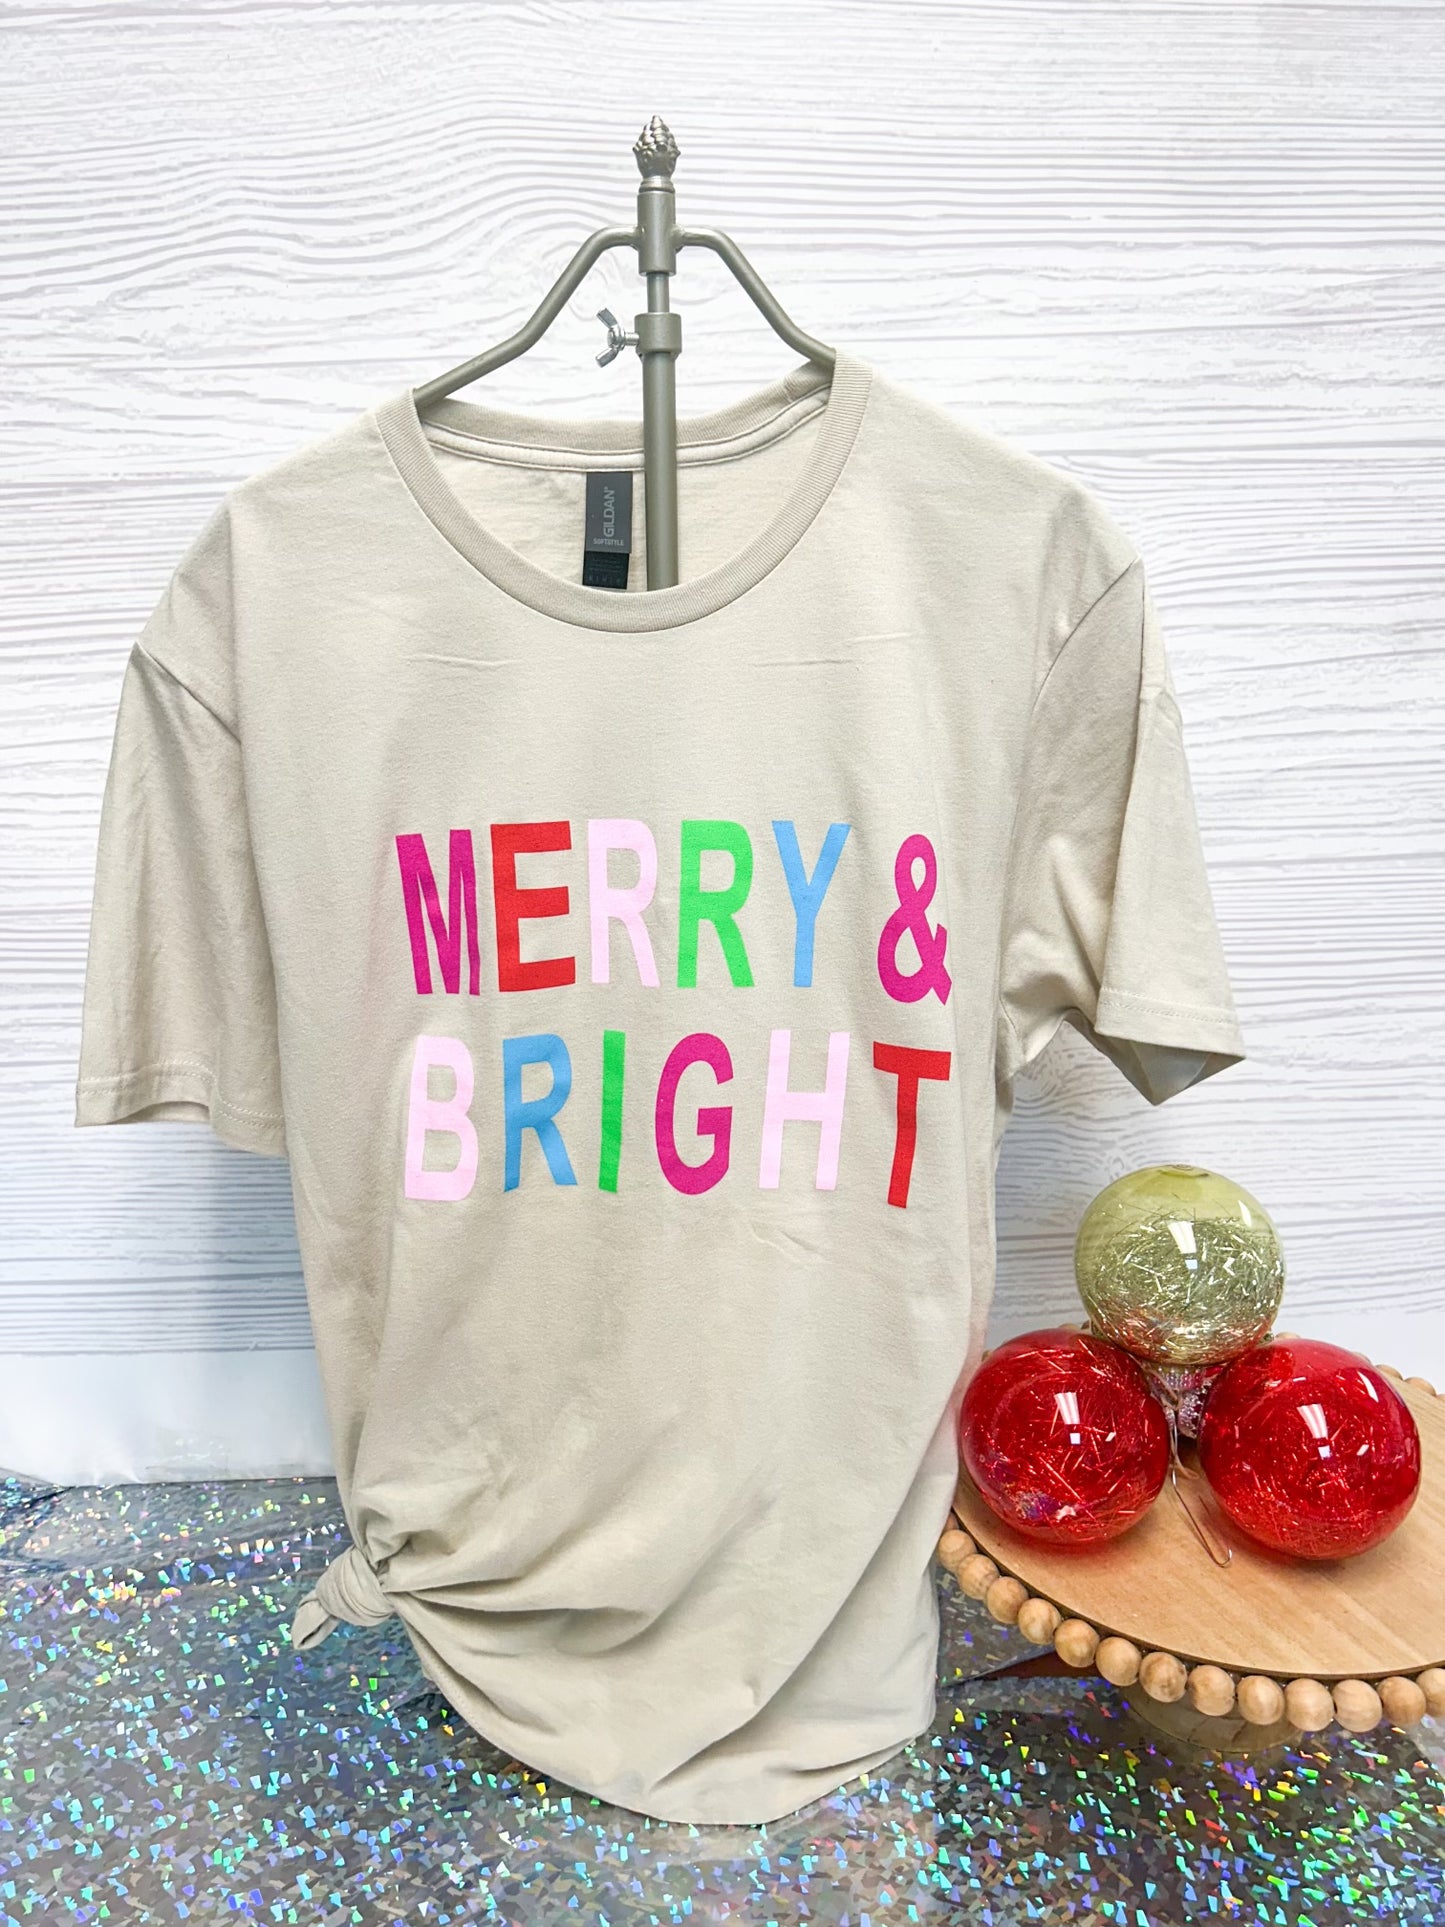 Completed Merry and Bright Shirts